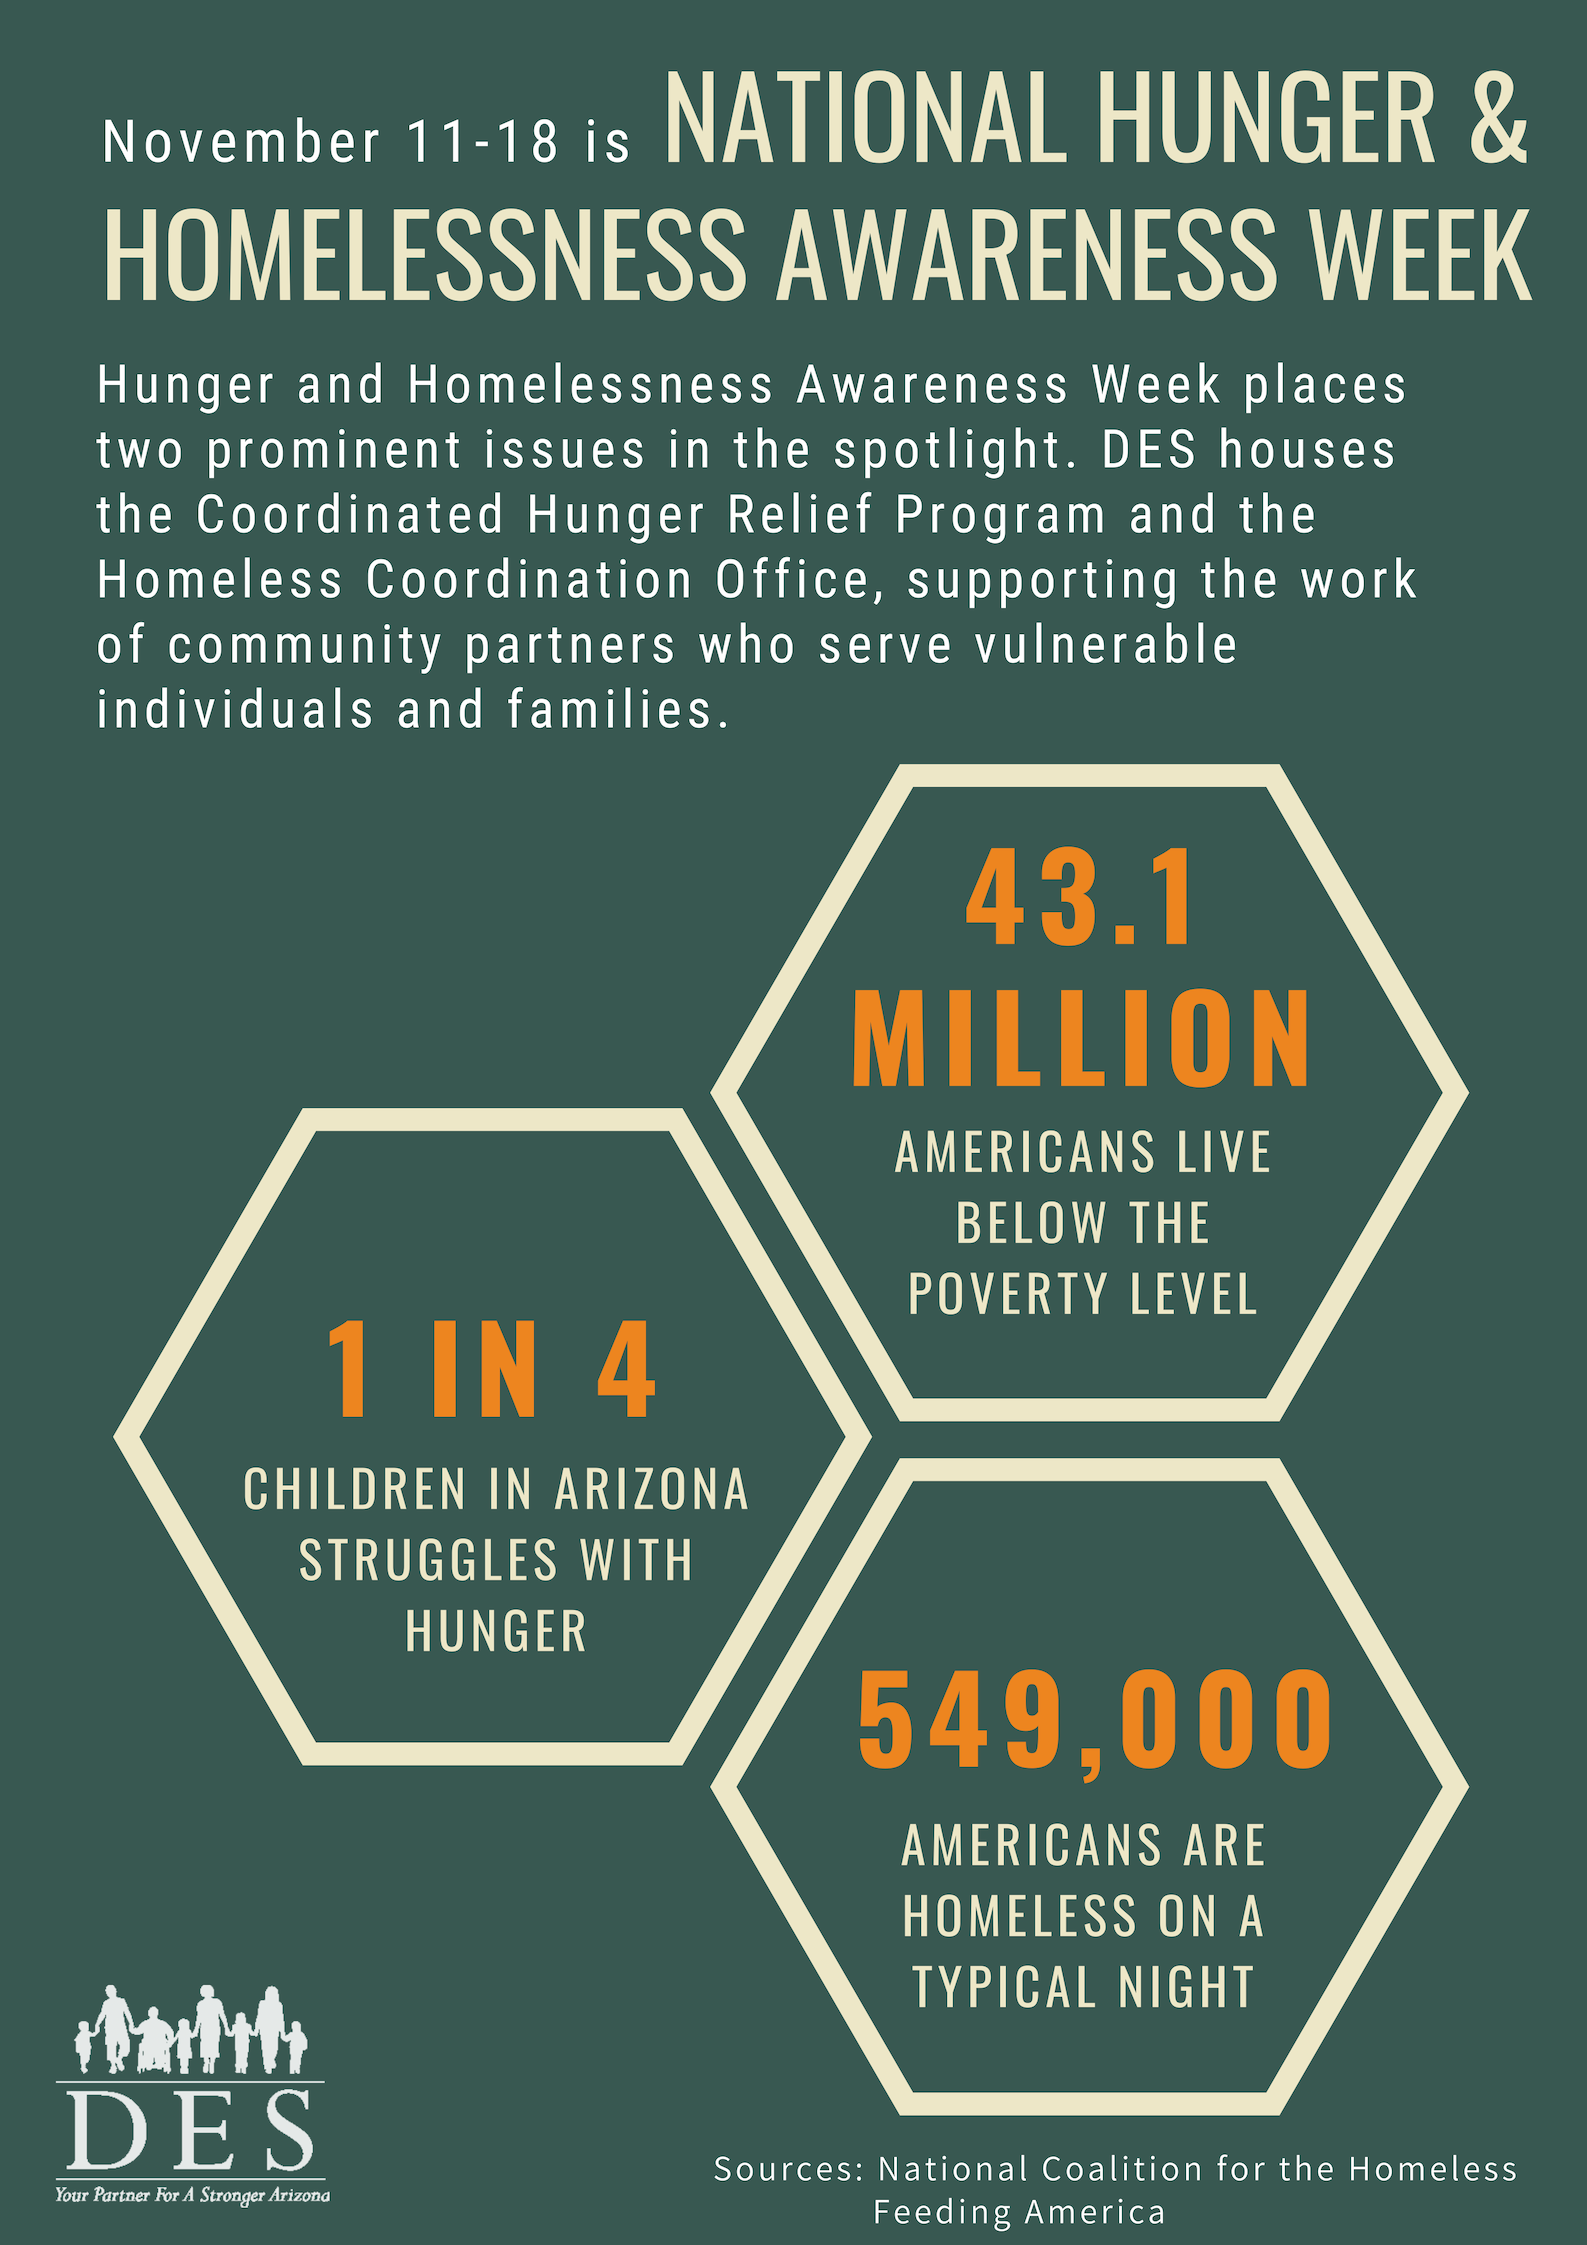 Facts and figures about National Hunger & Homelessness Awareness Week.